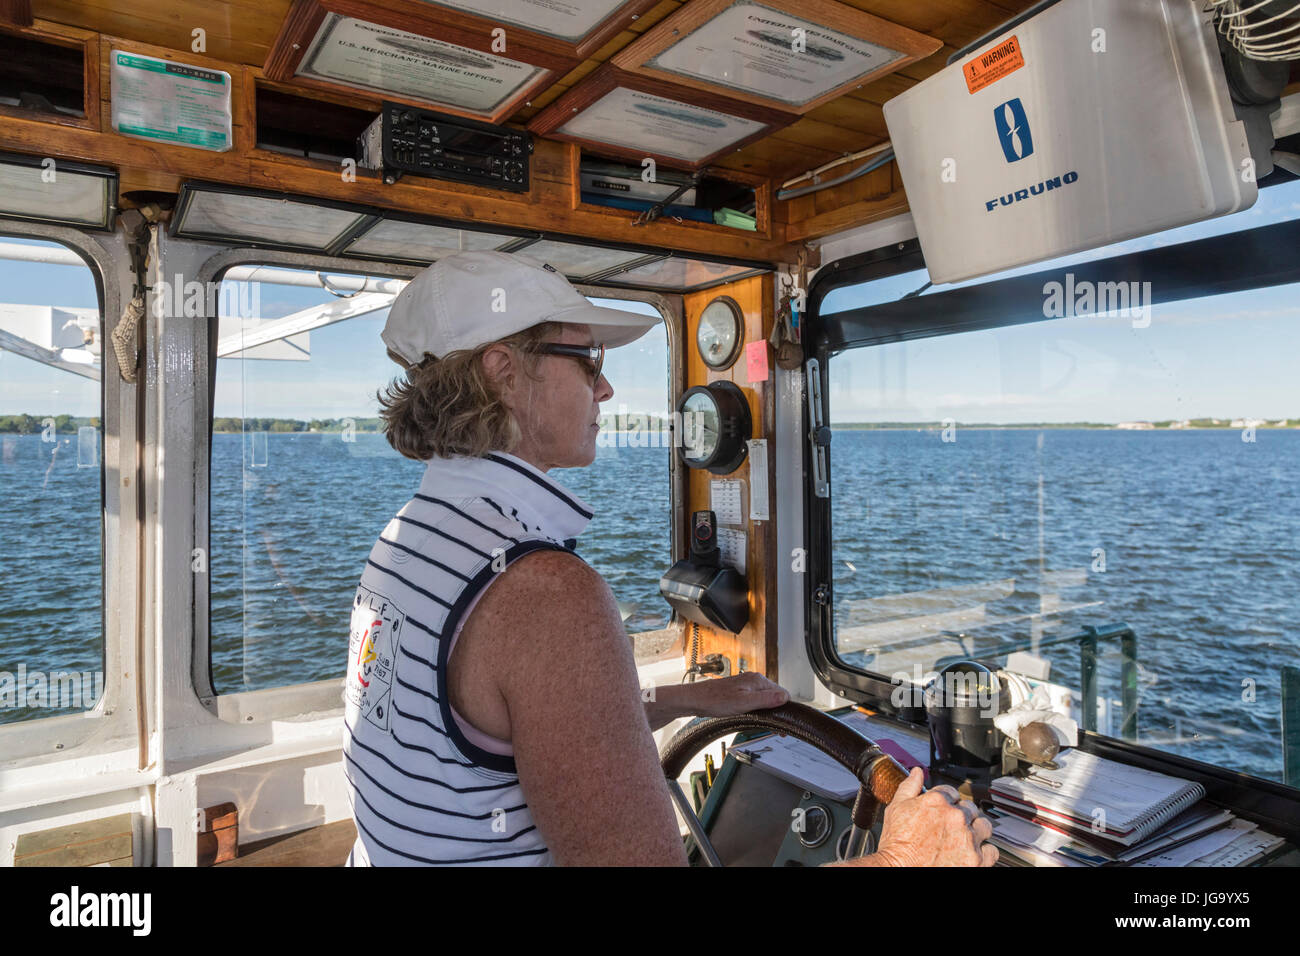 Oxford, Maryland - Marcia LoVerdi pilots the Bellevue-Oxford car ferry across the Tred Avon River near the Chesapeake Bay. LoVerdi has captained the f Stock Photo